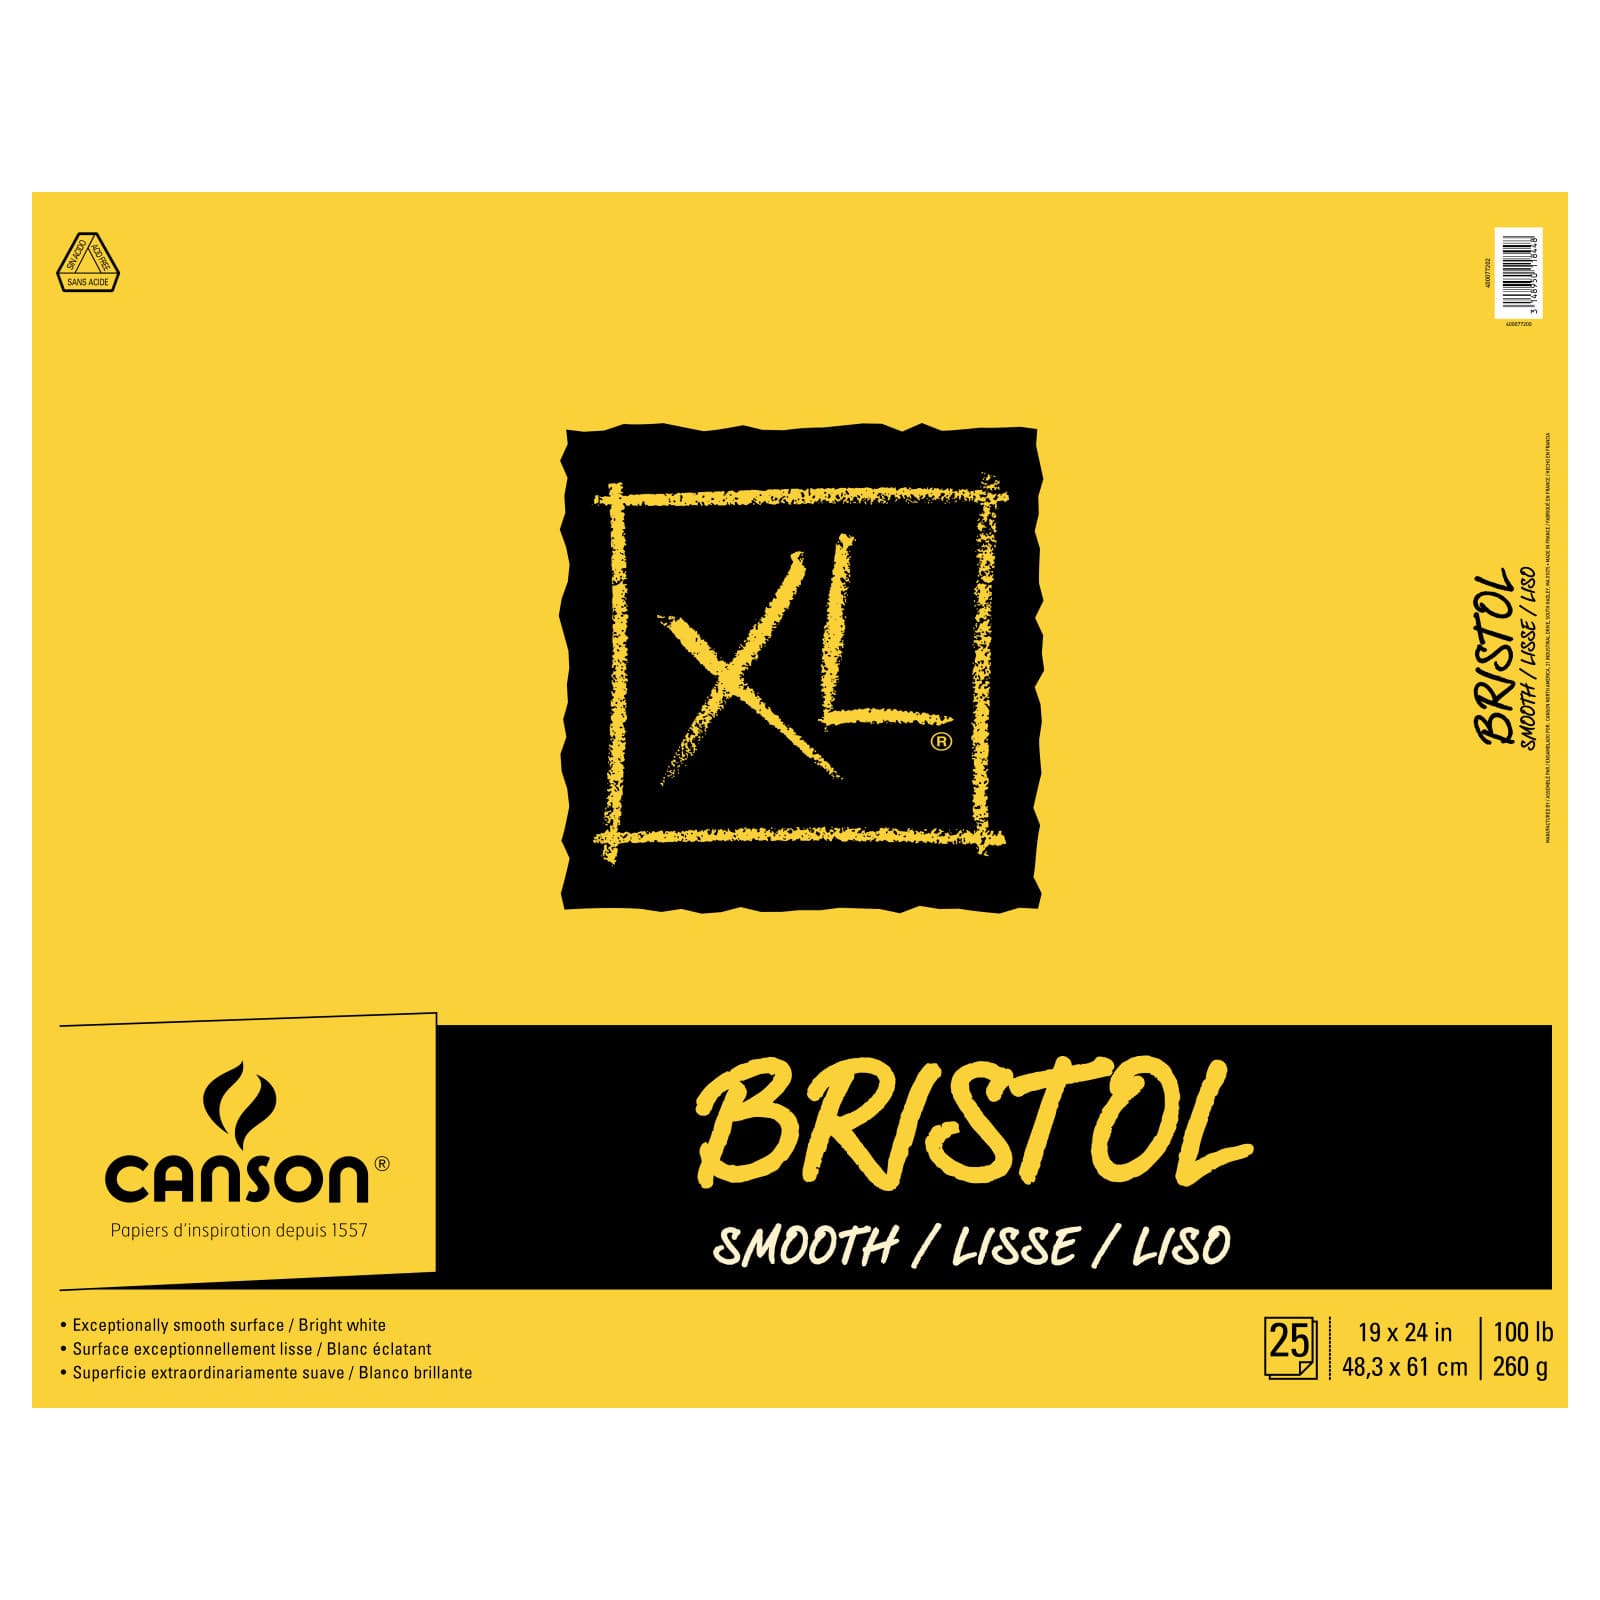 Canson XL Series Bristol Paper, Smooth, Foldover Macao